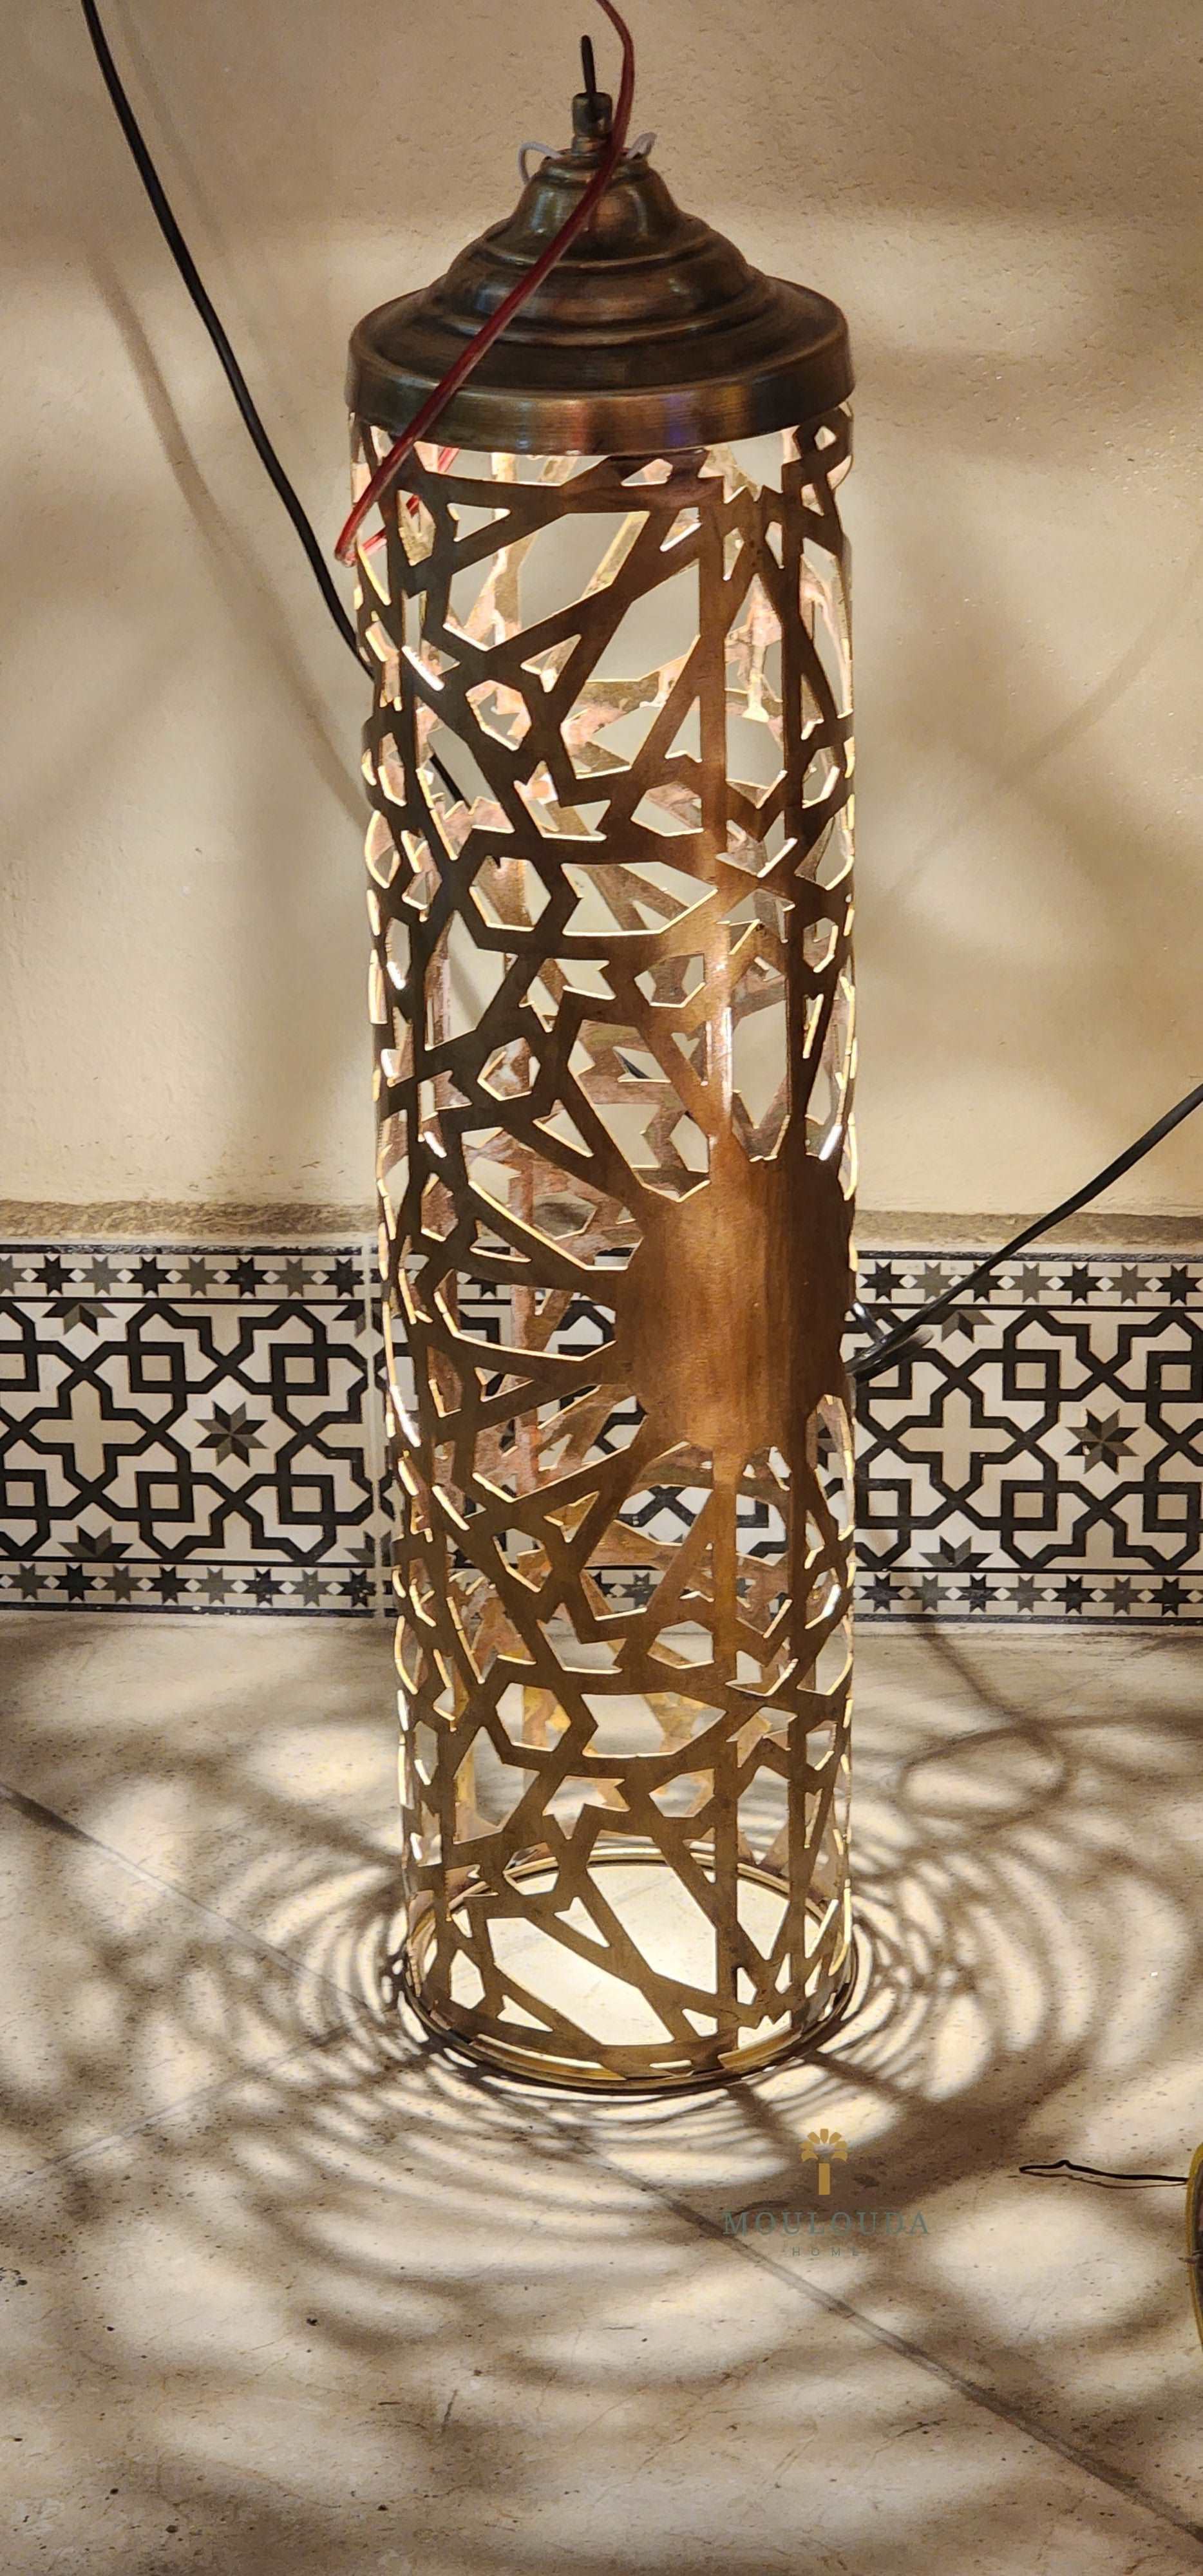 Add a Touch of Boho Chic with Our Designer Moroccan Floor Lamp - Mouloudahome